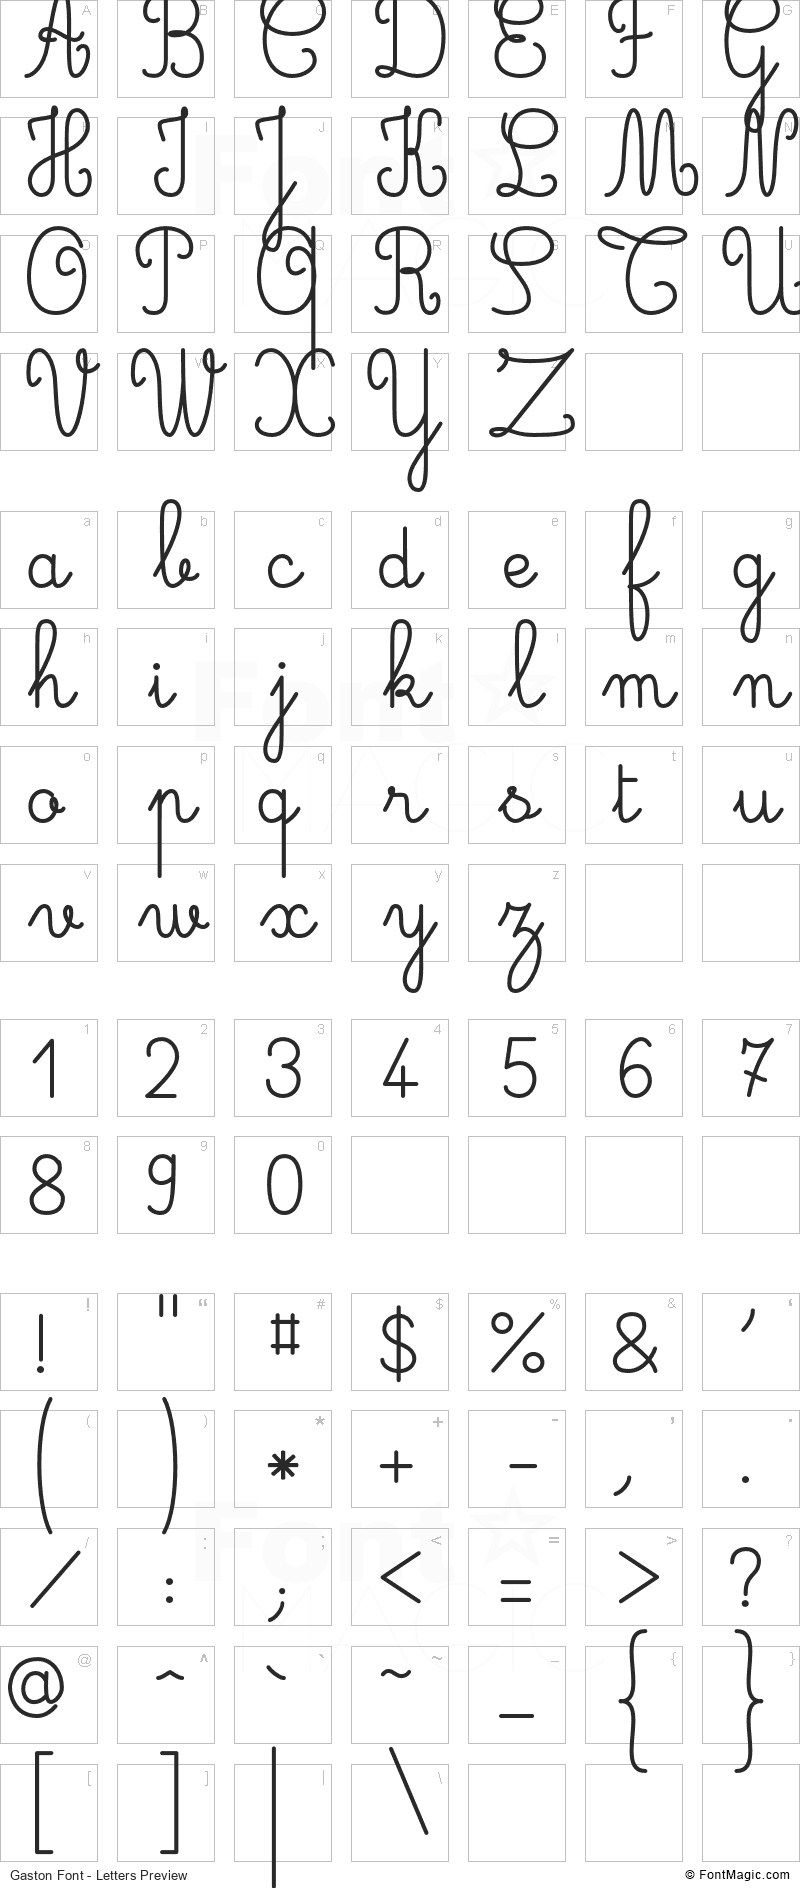 Gaston Font - All Latters Preview Chart